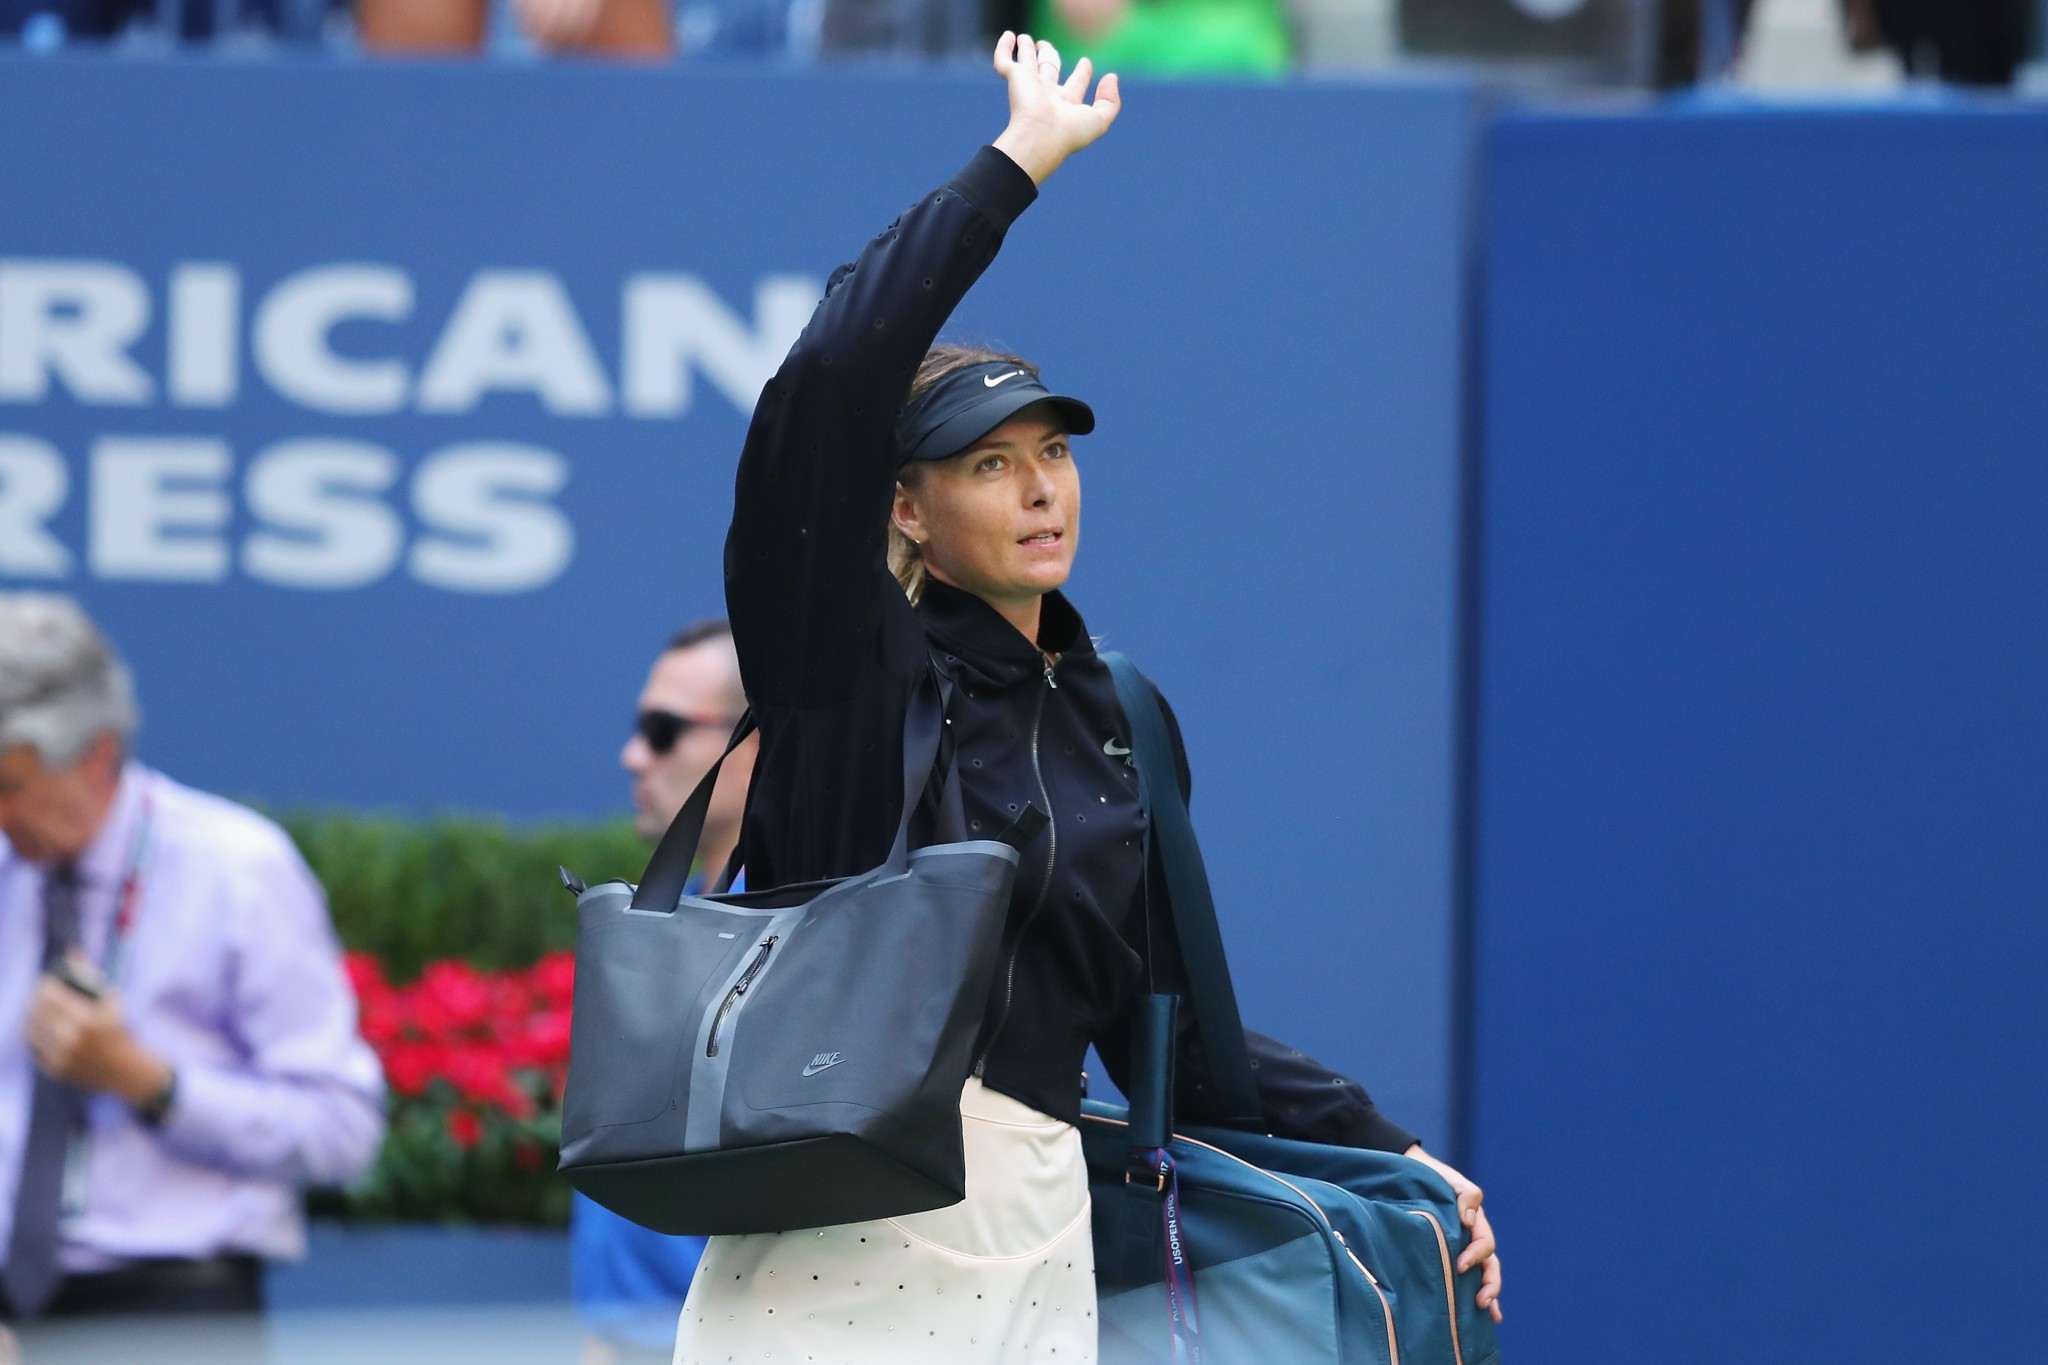 Sharapova knocked out of US Open in first Grand Slam since returning from doping ban